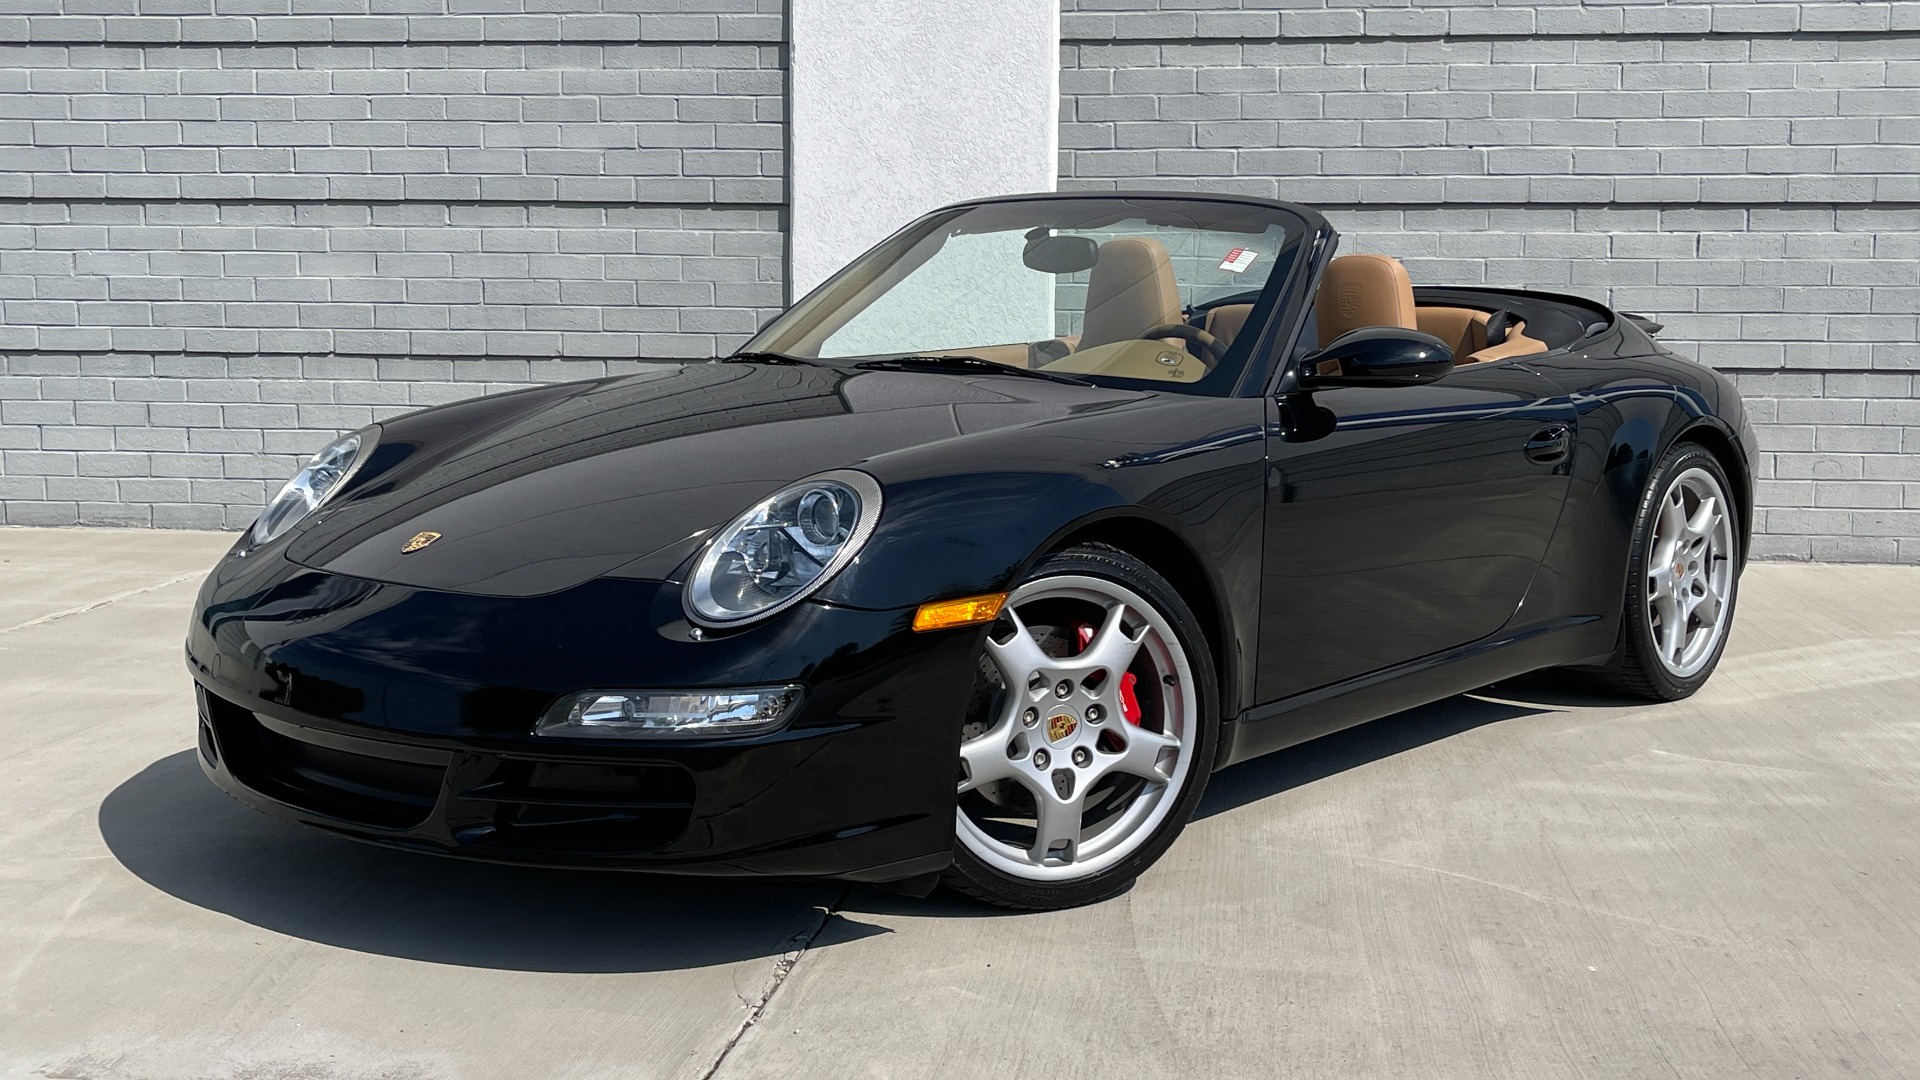 Used 2006 Porsche 911 CARRERA S CABRIOLET / BOSE / CD CHANGER / PWR SEAT PKG / HTD STS for sale $56,400 at Formula Imports in Charlotte NC 28227 7